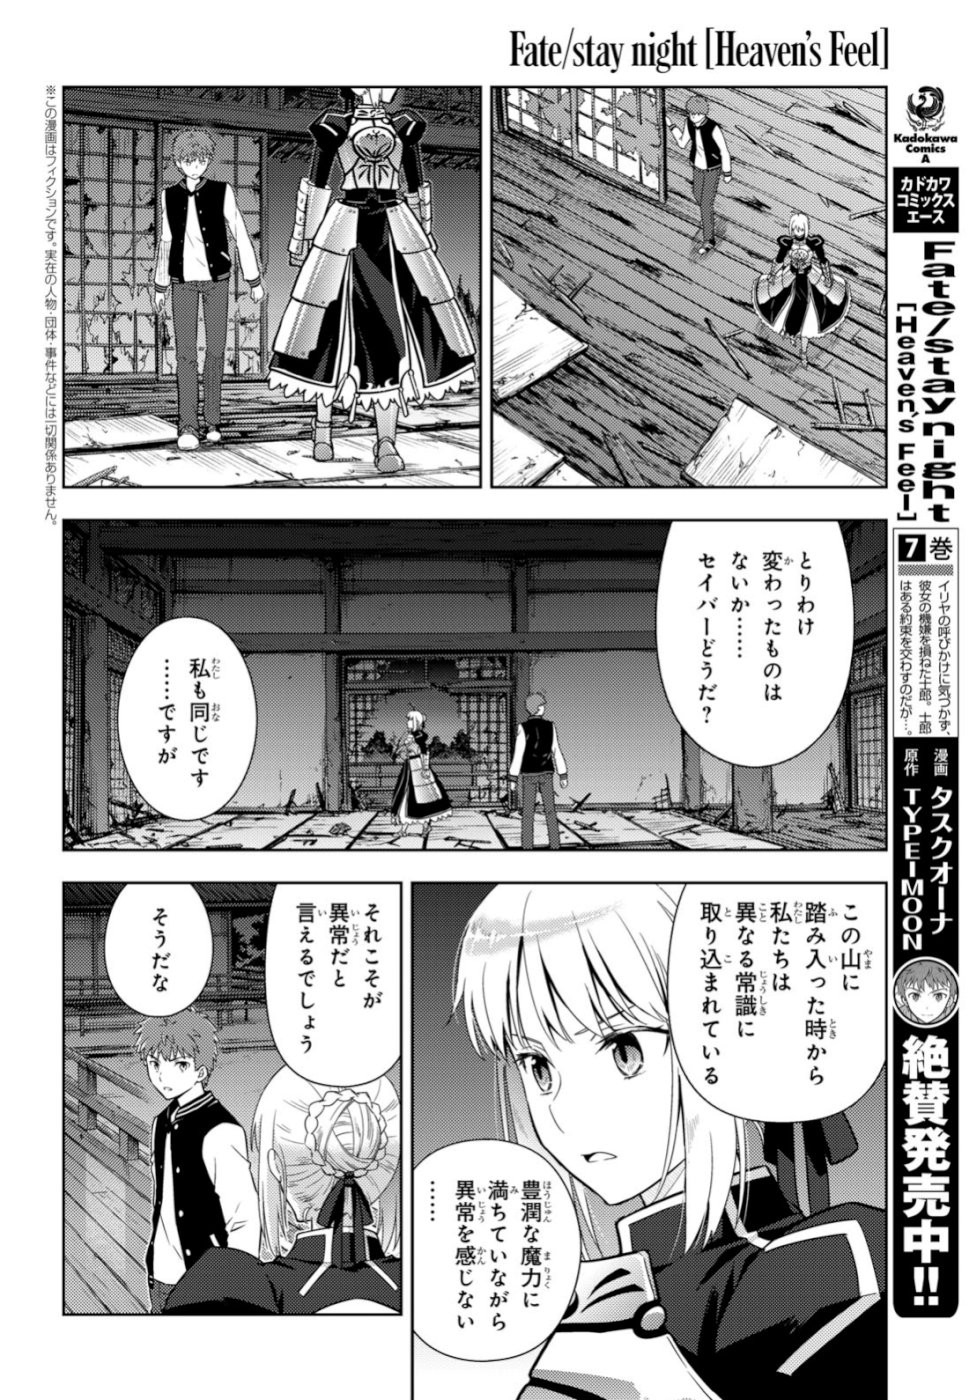 Fate/Stay night Heaven's Feel - Chapter 53 - Page 2